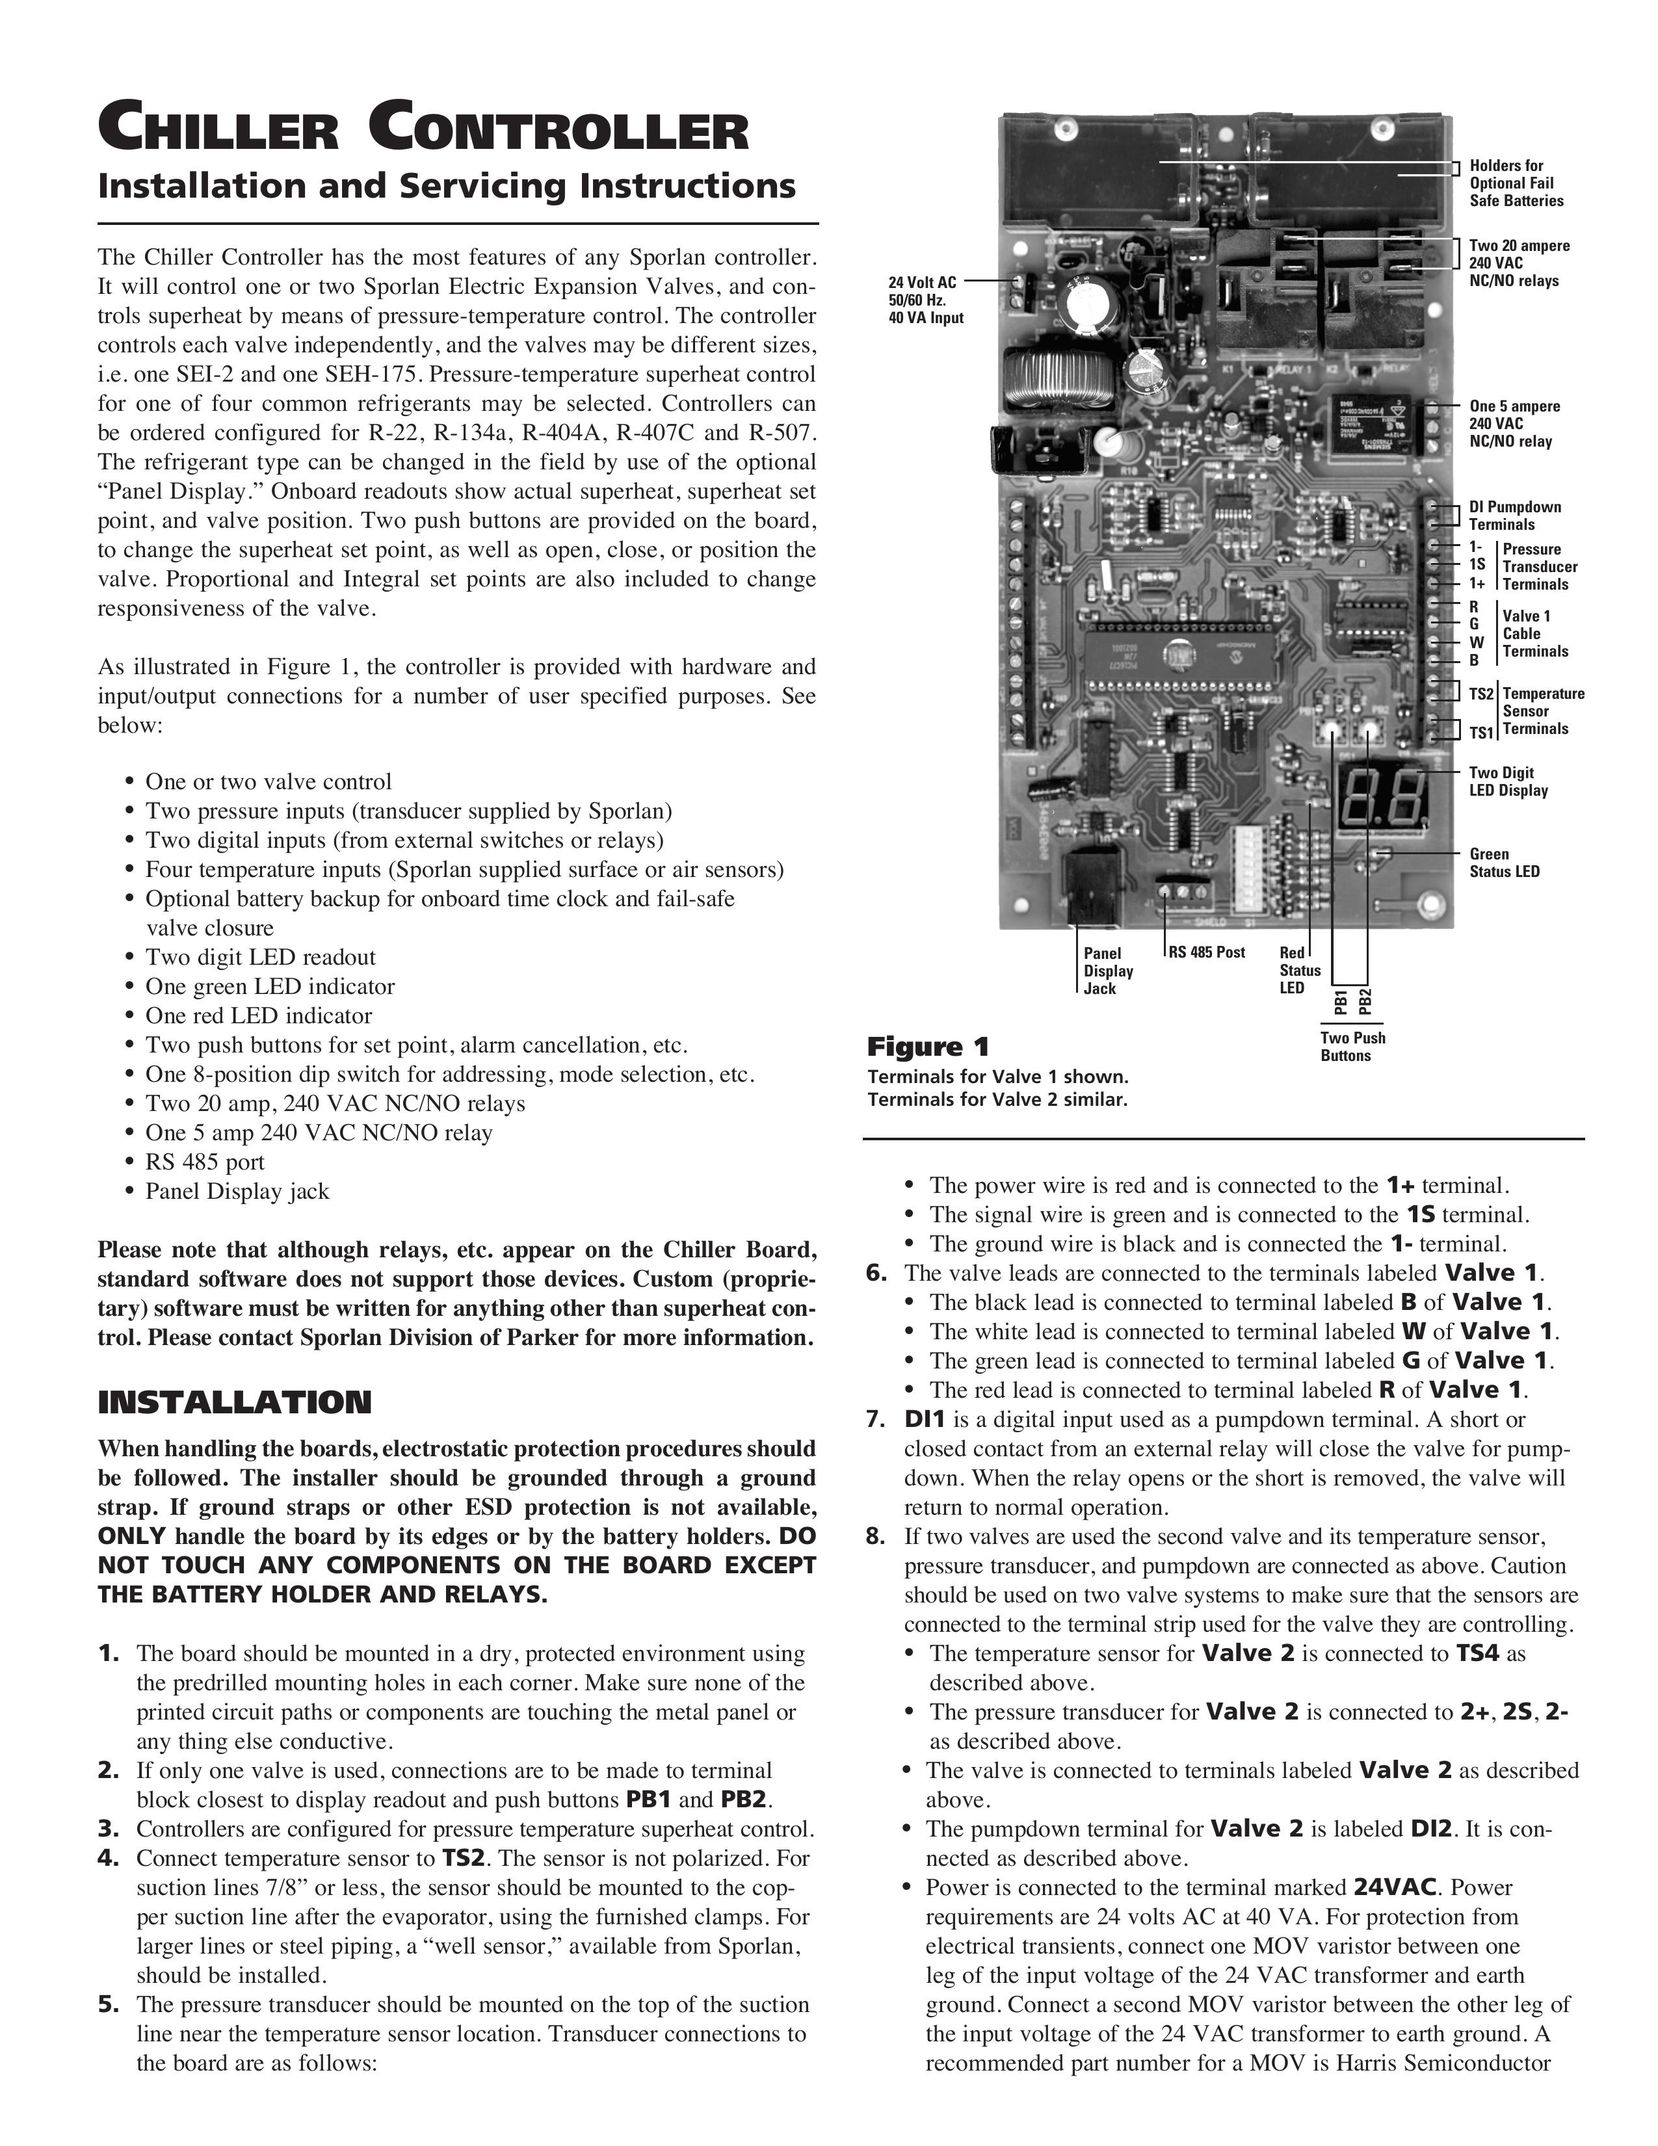 Parker Hannifin R-507 Network Card User Manual